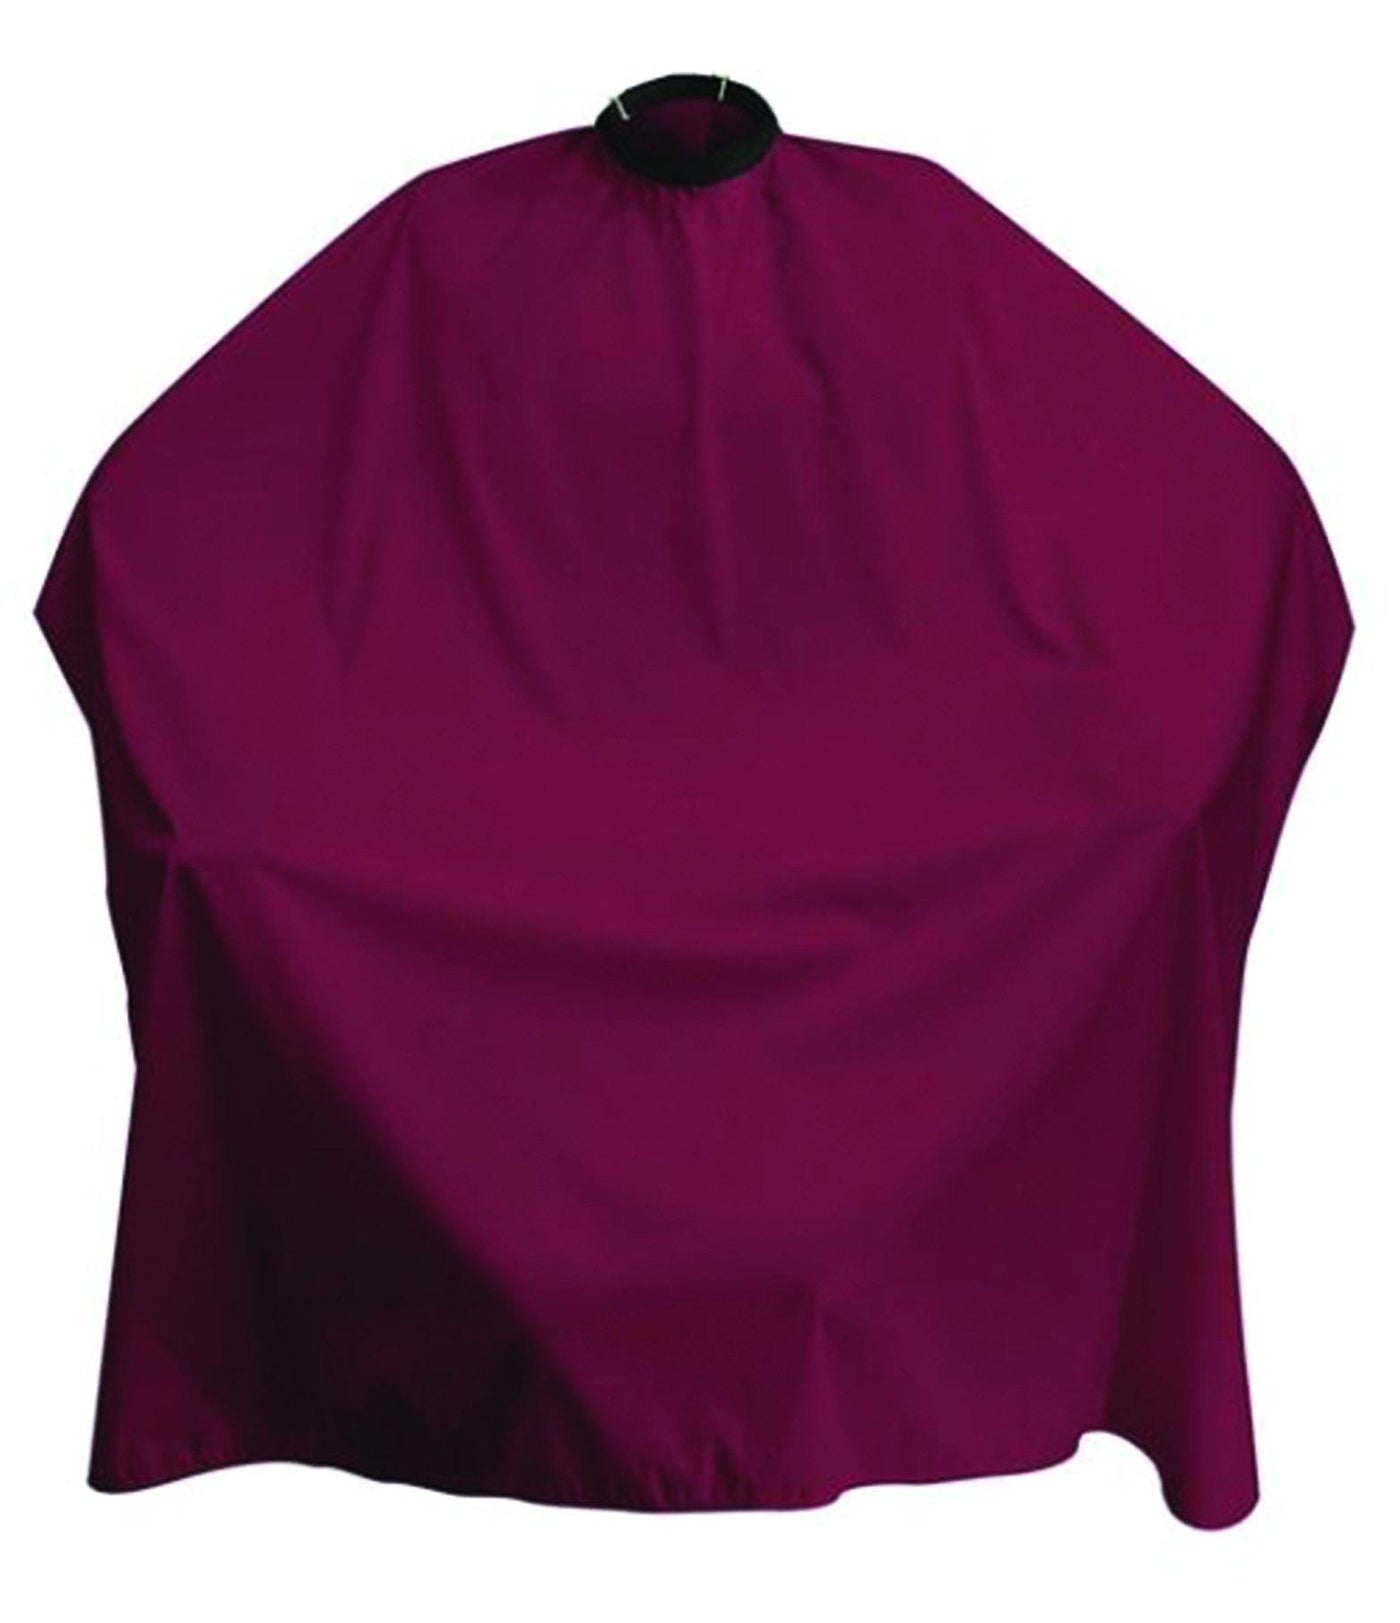 BARBER PRO Barber Cape, Hair Cutting Cape with Snap Closure